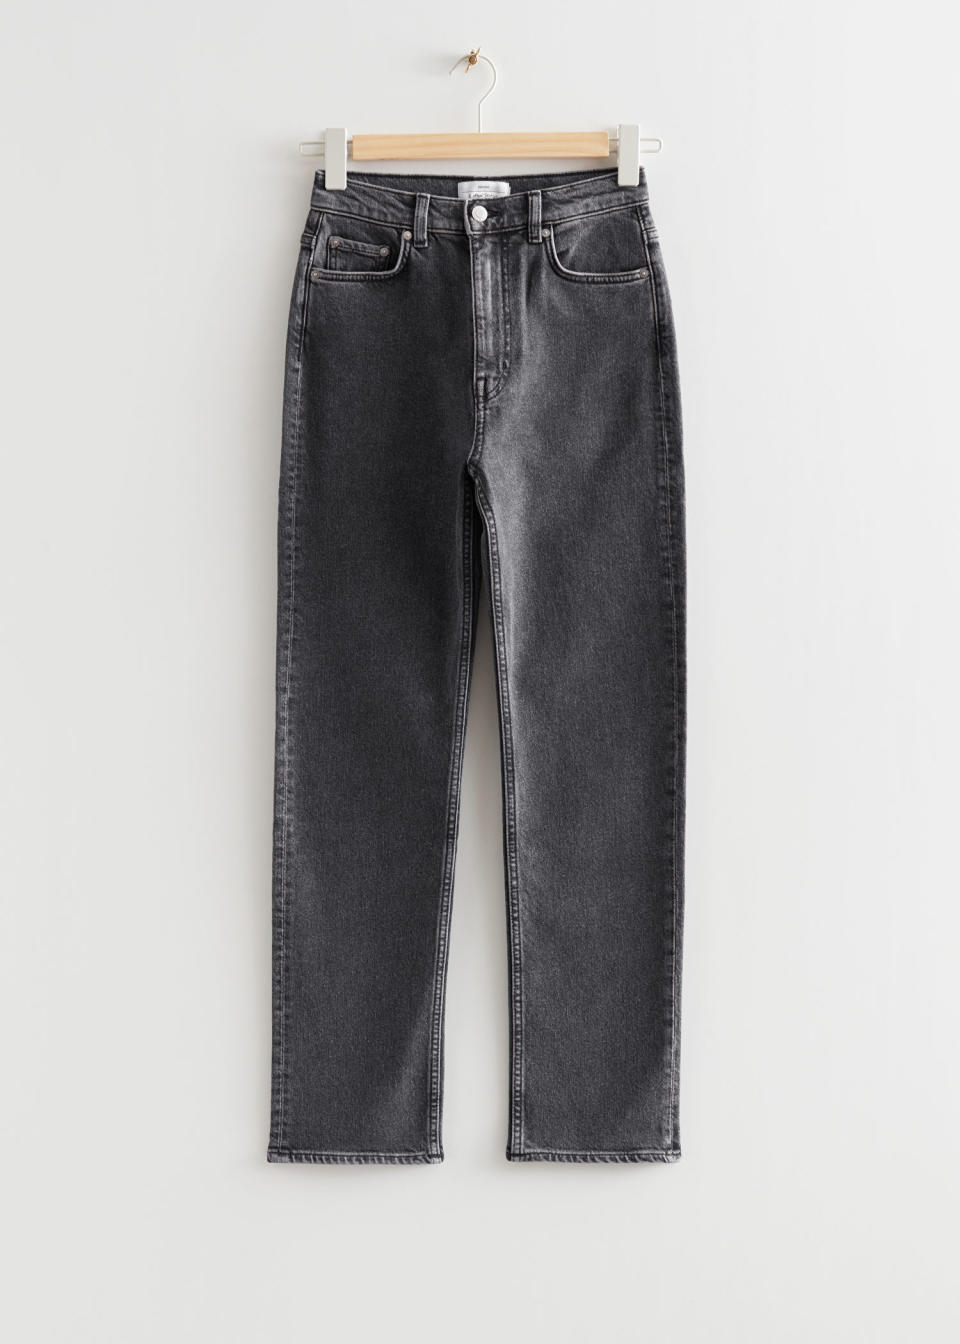 Slim Cut Jeans in Mid Grey. Image via & Other Stories.